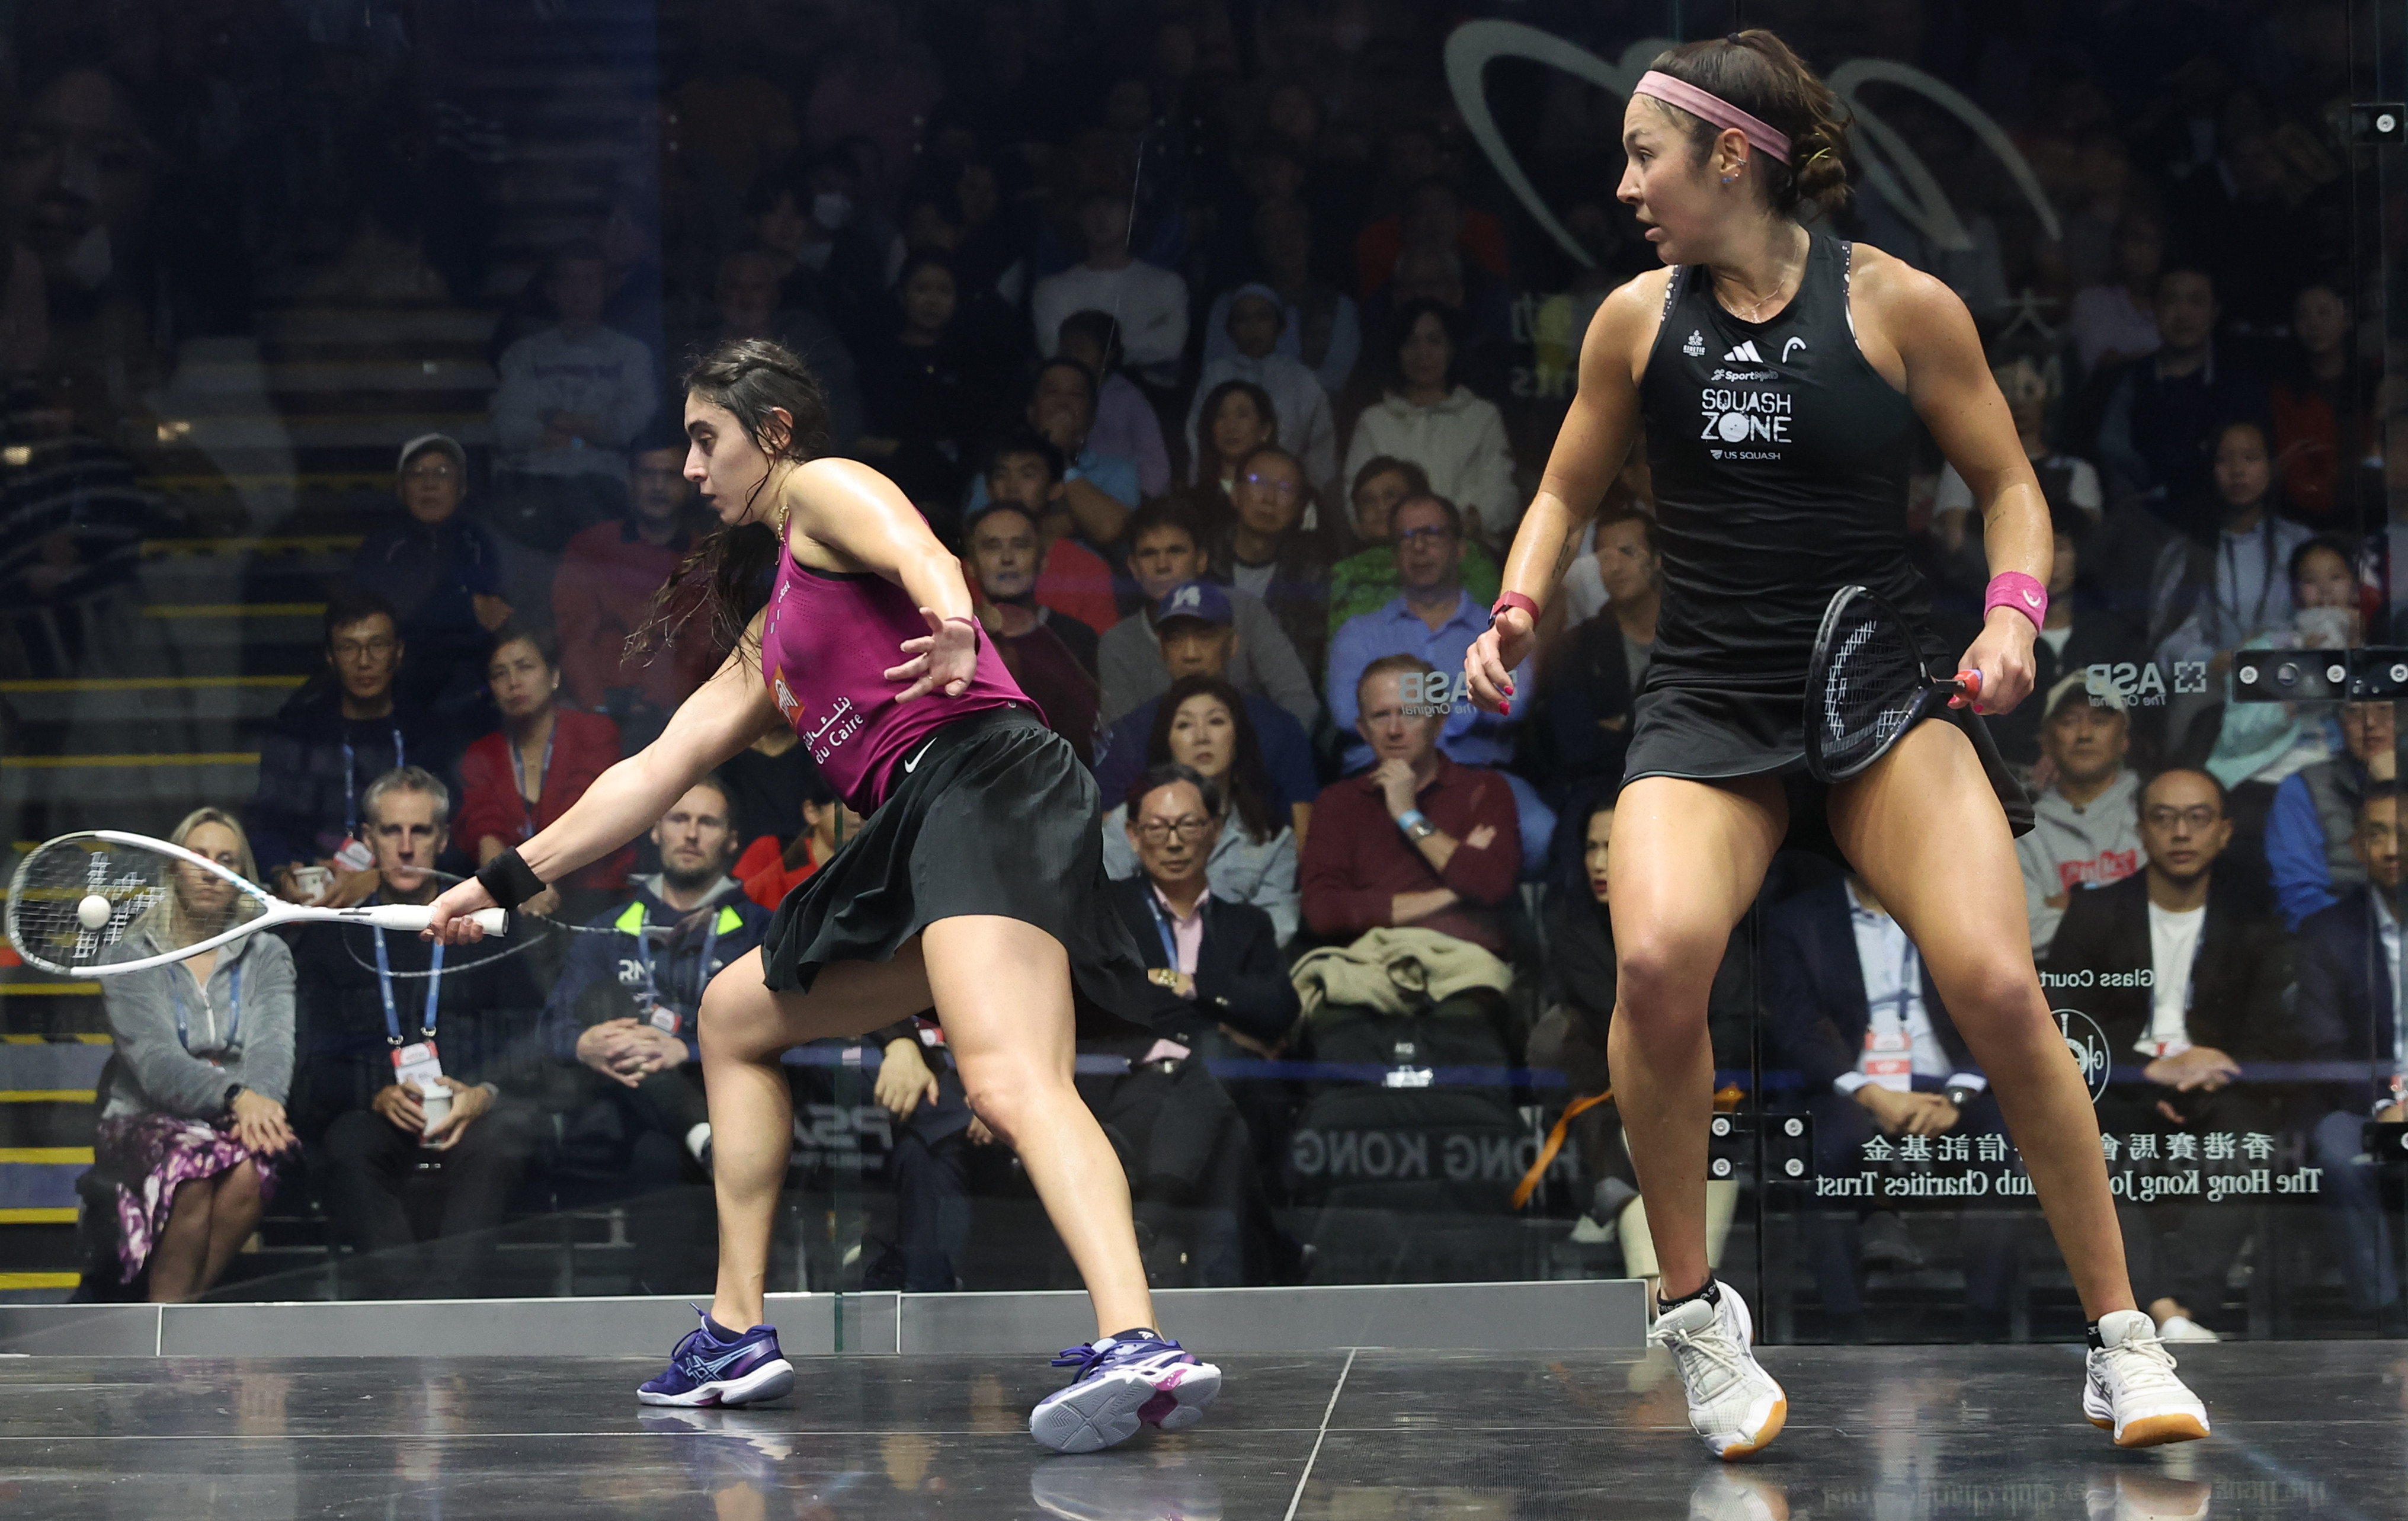 Amanda Sobhy (right) and
Nour El Sherbini battle it out in the semi-finals of the Hong Kong Squash Open. Photo: Edmond So